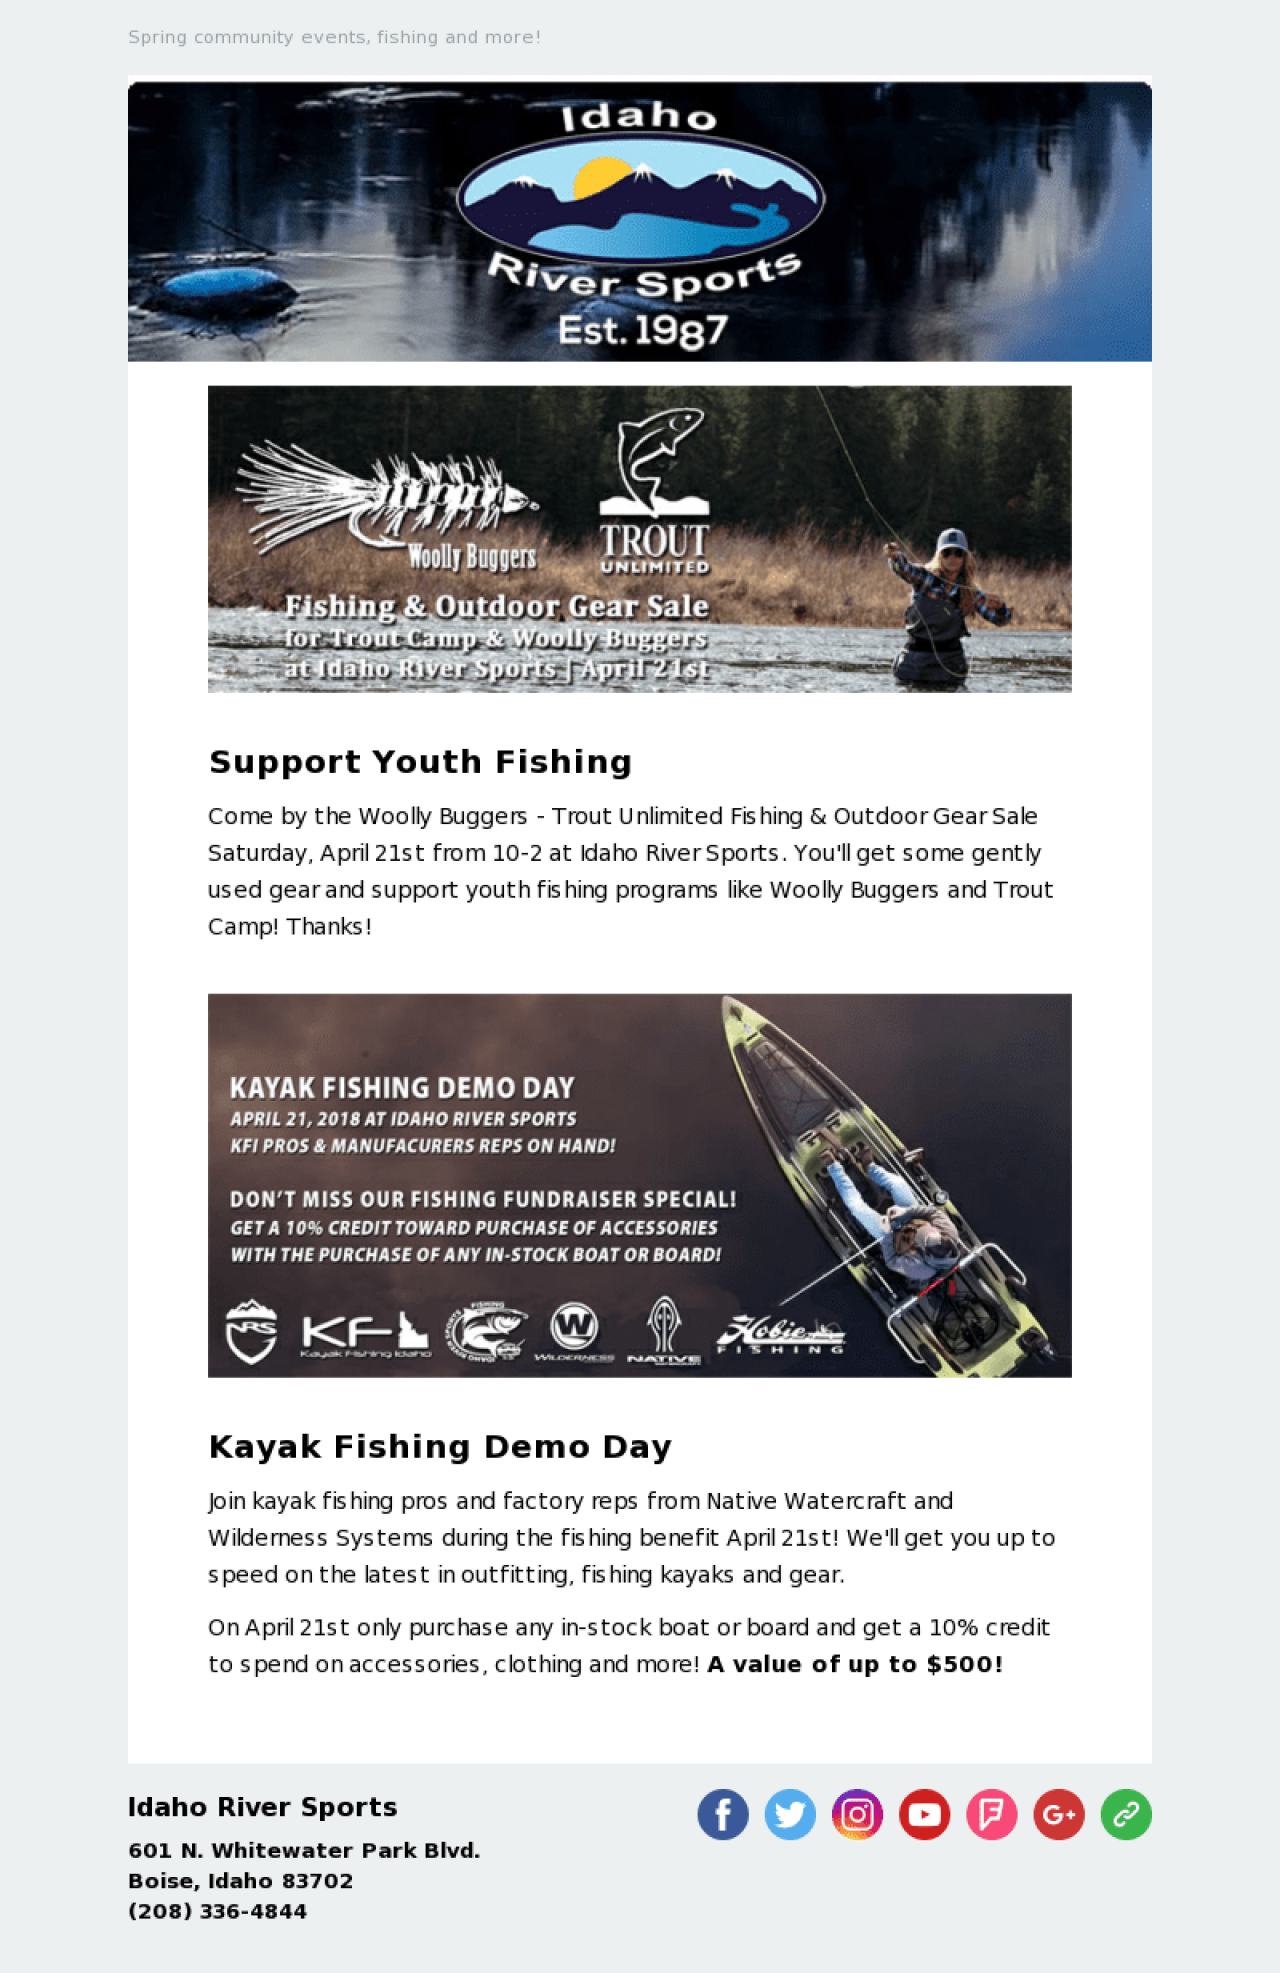 Idaho River Sports example - Made with MailerLite